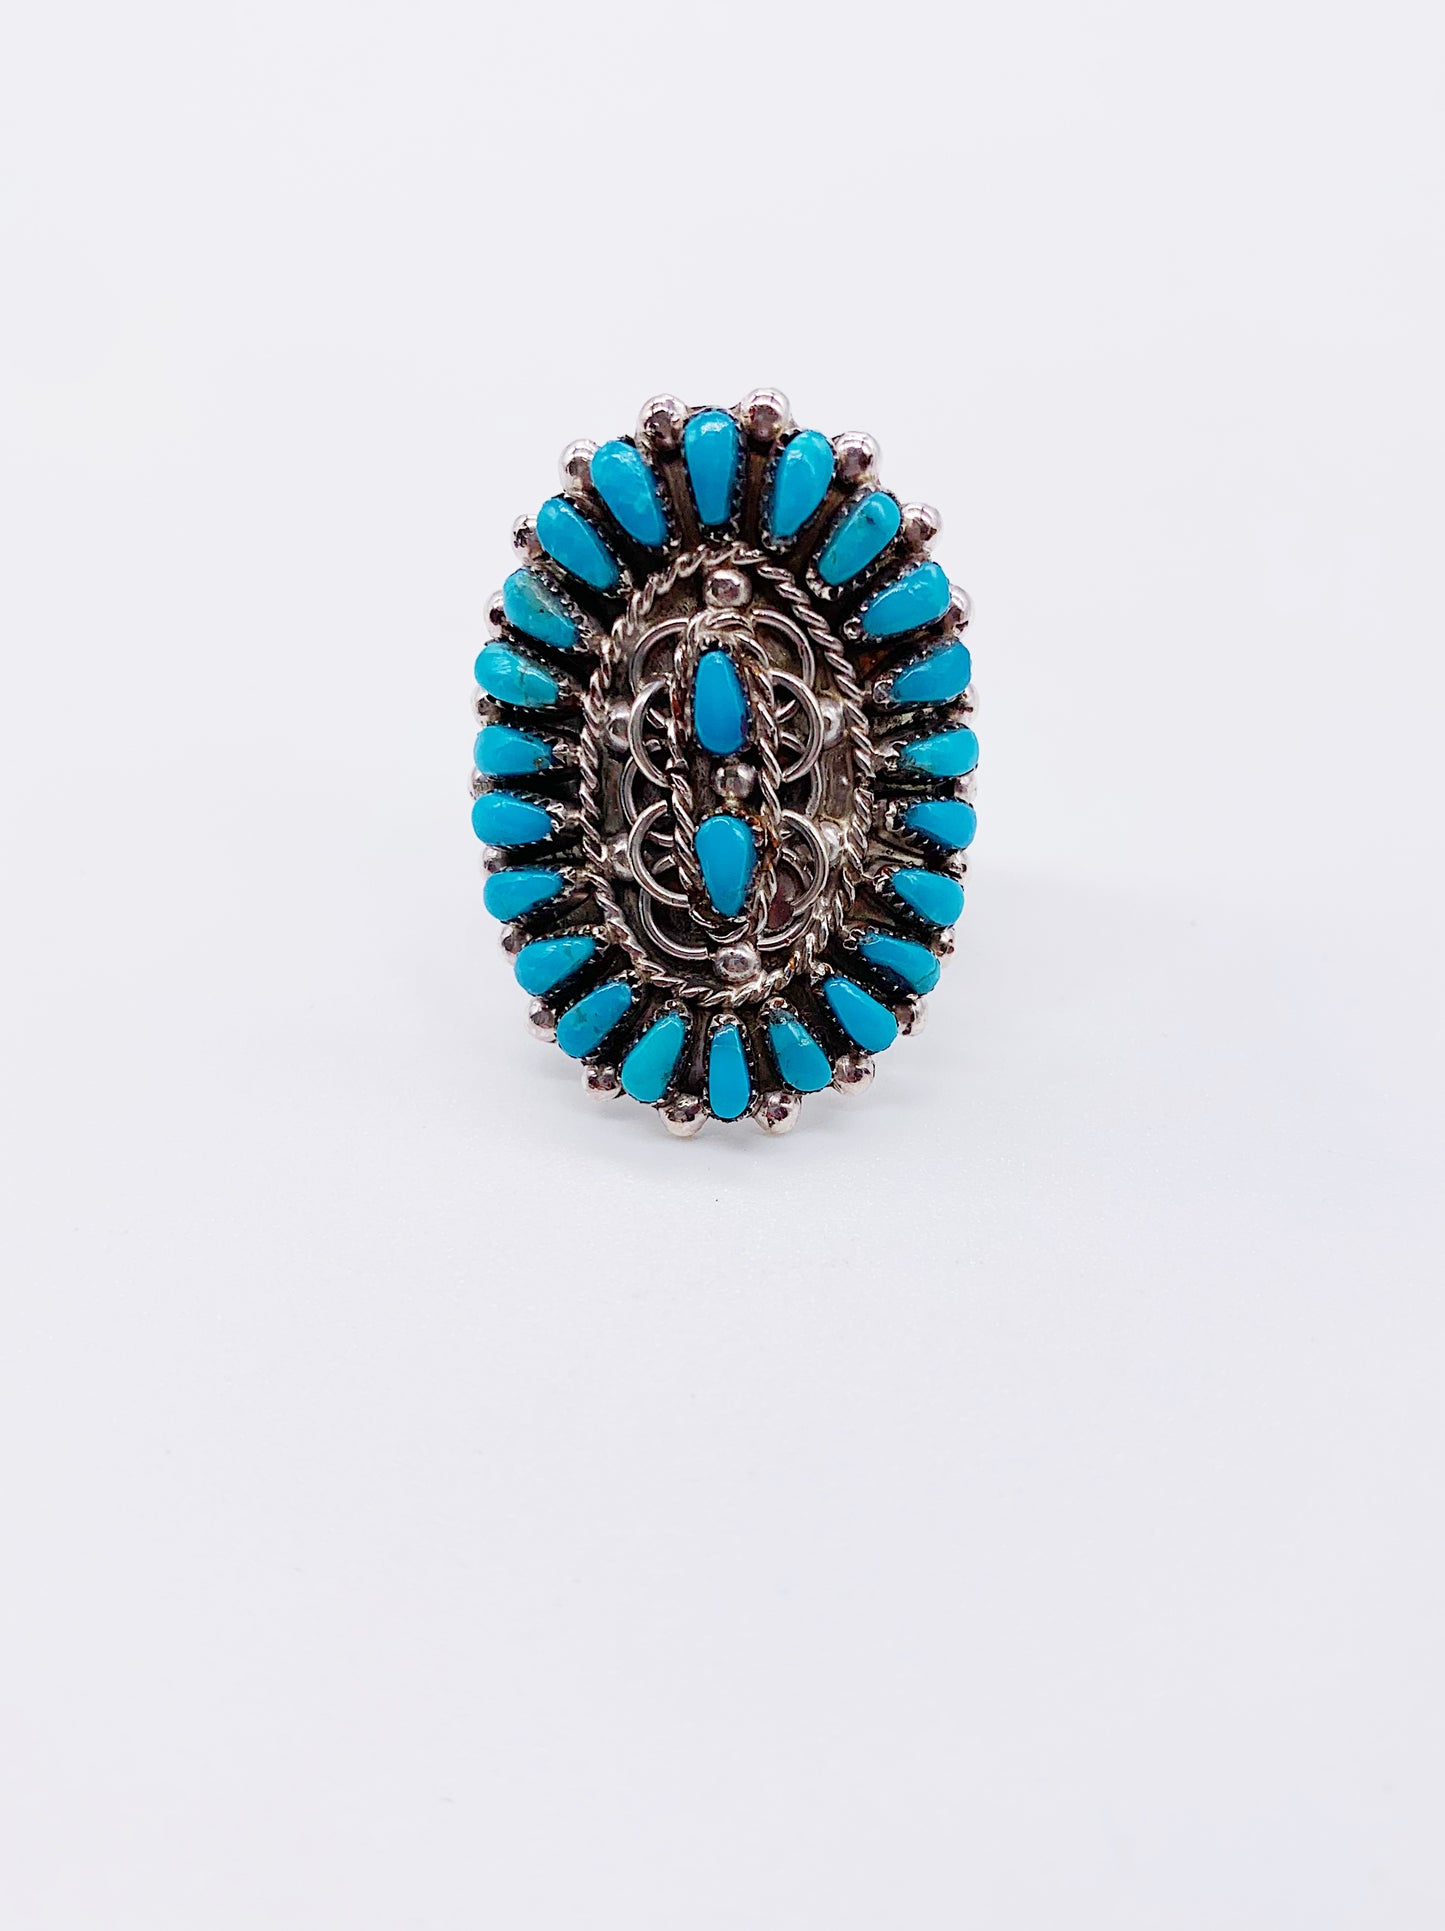 TURQUOISE PETIT POINT CLUSTER RING